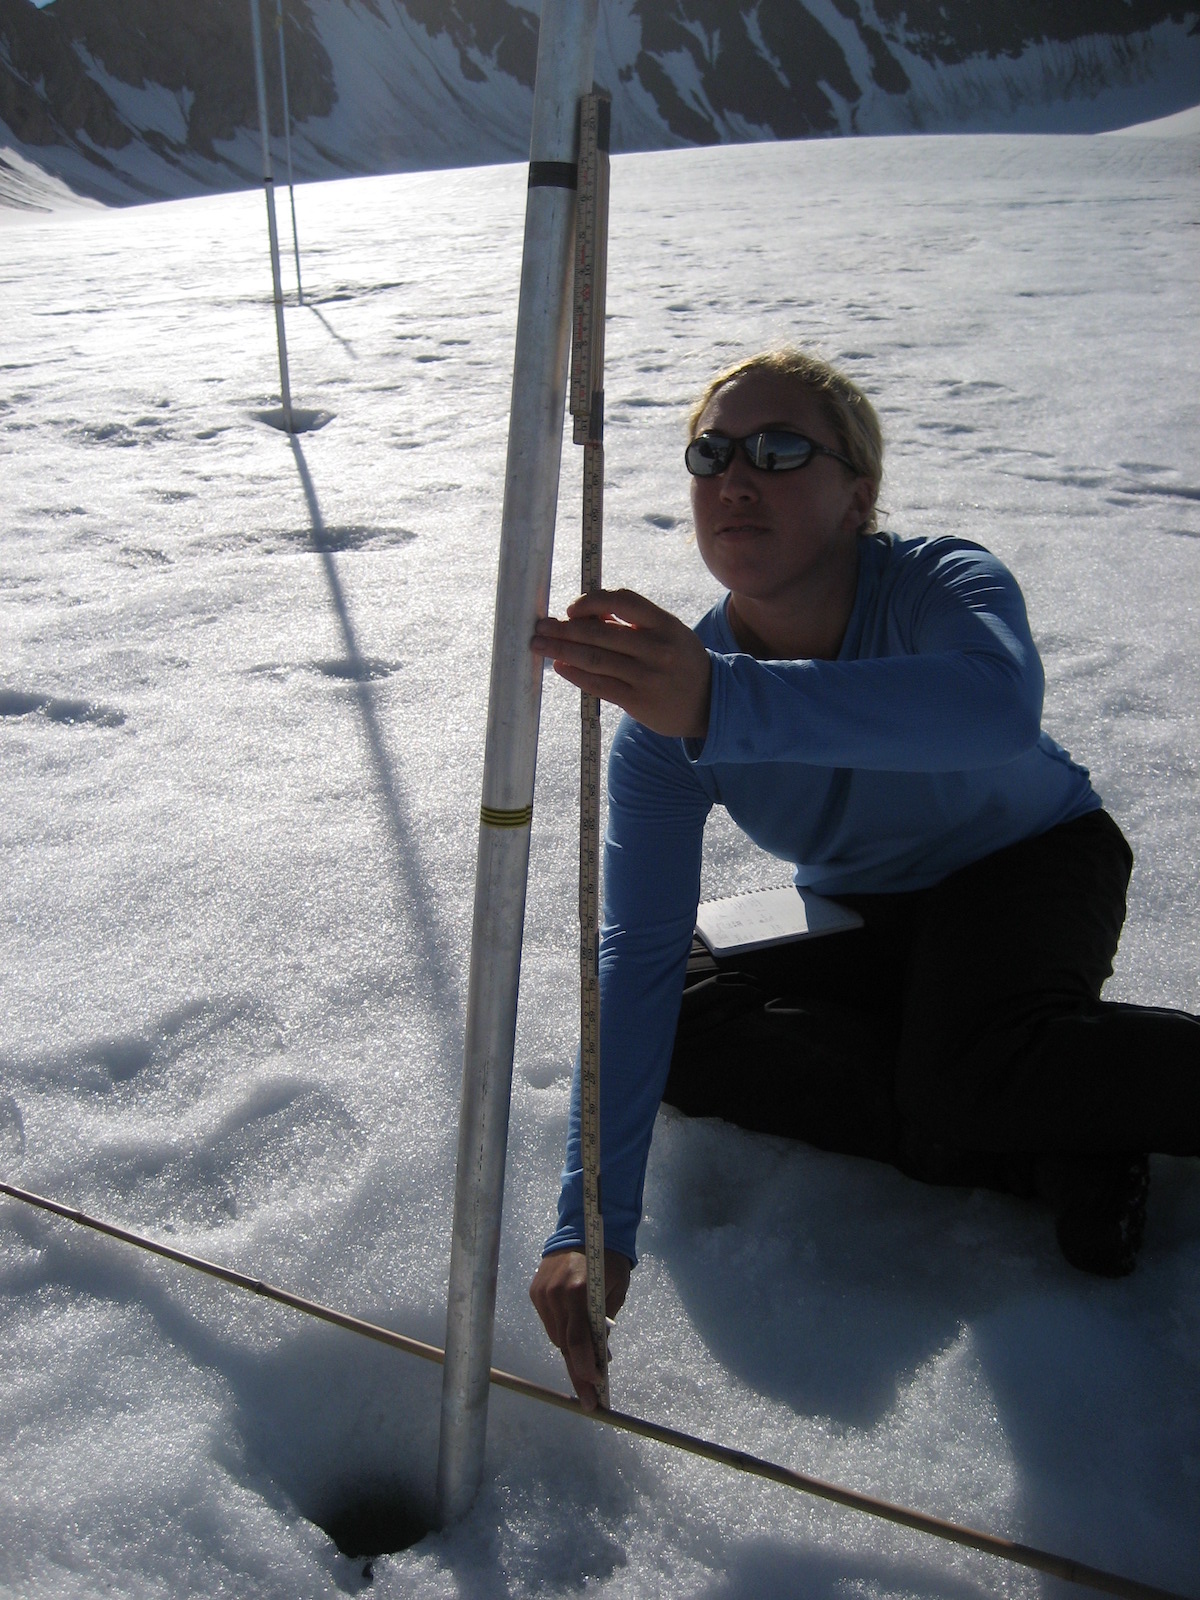 A meter stick is used to measure changes in glacial ablation (snow loss and ice melt). Note the yellow tape on the pole. This was the depth of the snow and ice on July 23, 2008. At Linne Glacier in Linne Valley, Svalbard, Norway.